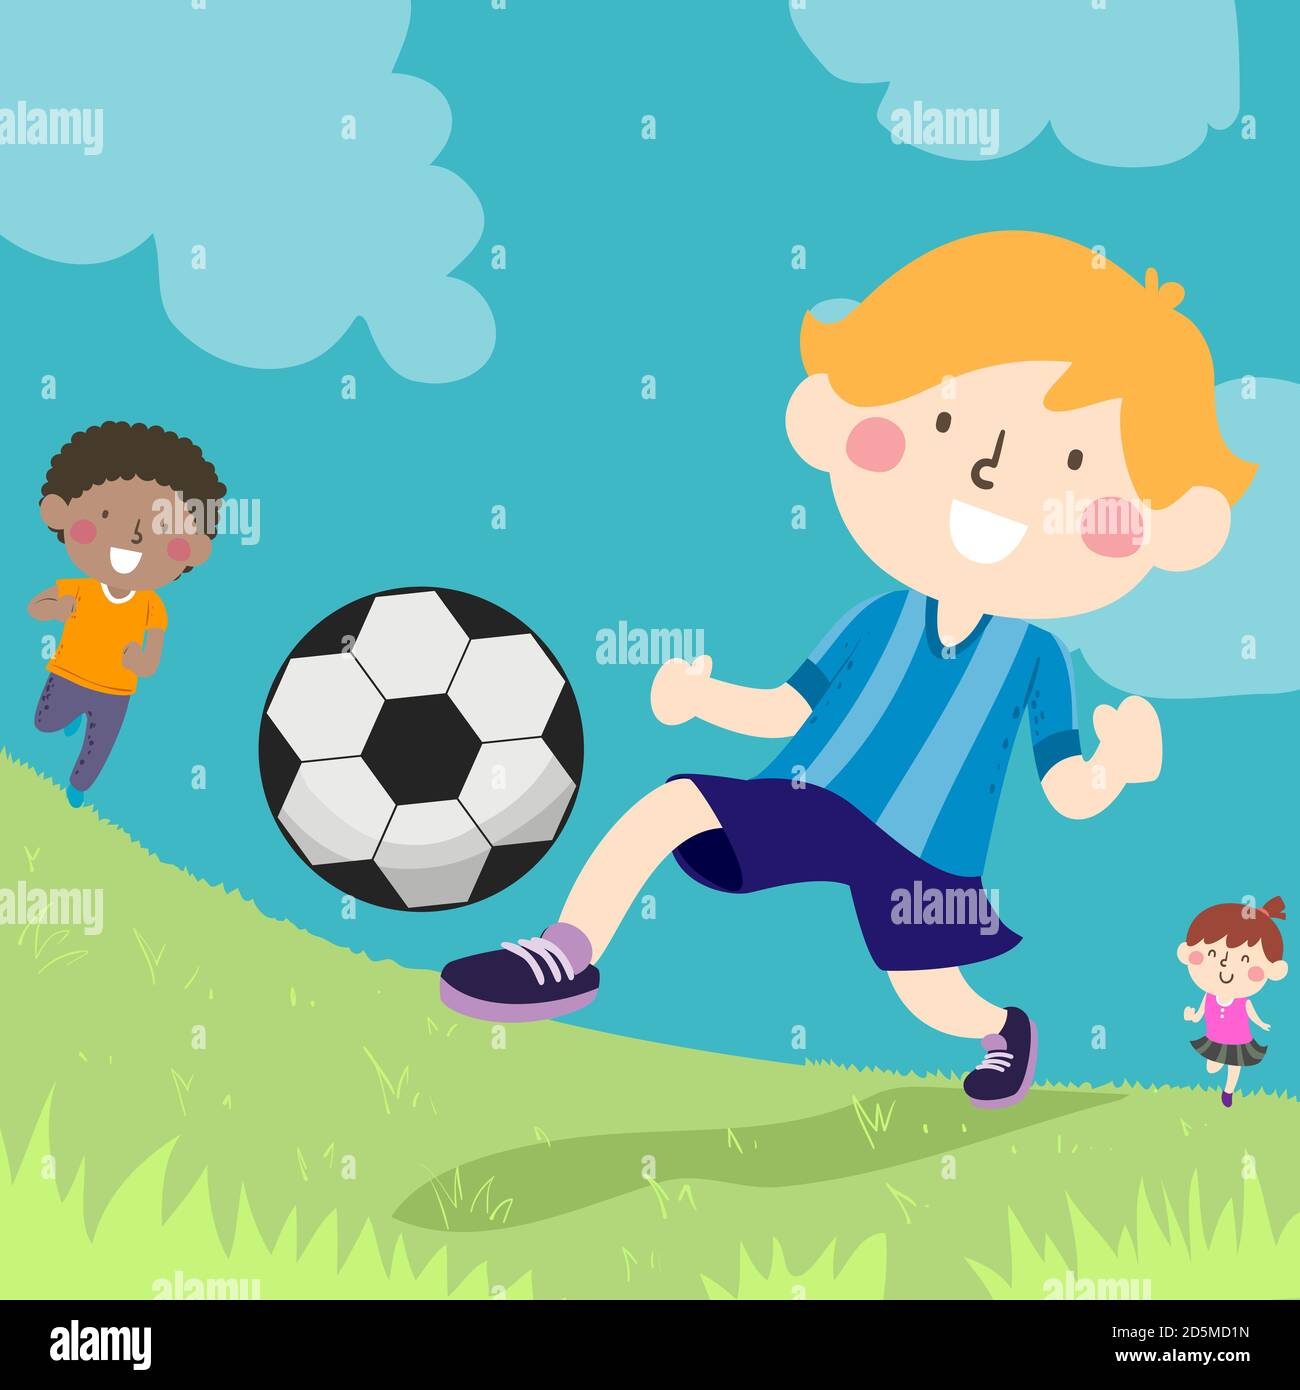 Illustration of Kids Kicking Soccer Ball Outdoors in the Field Stock Photo  - Alamy